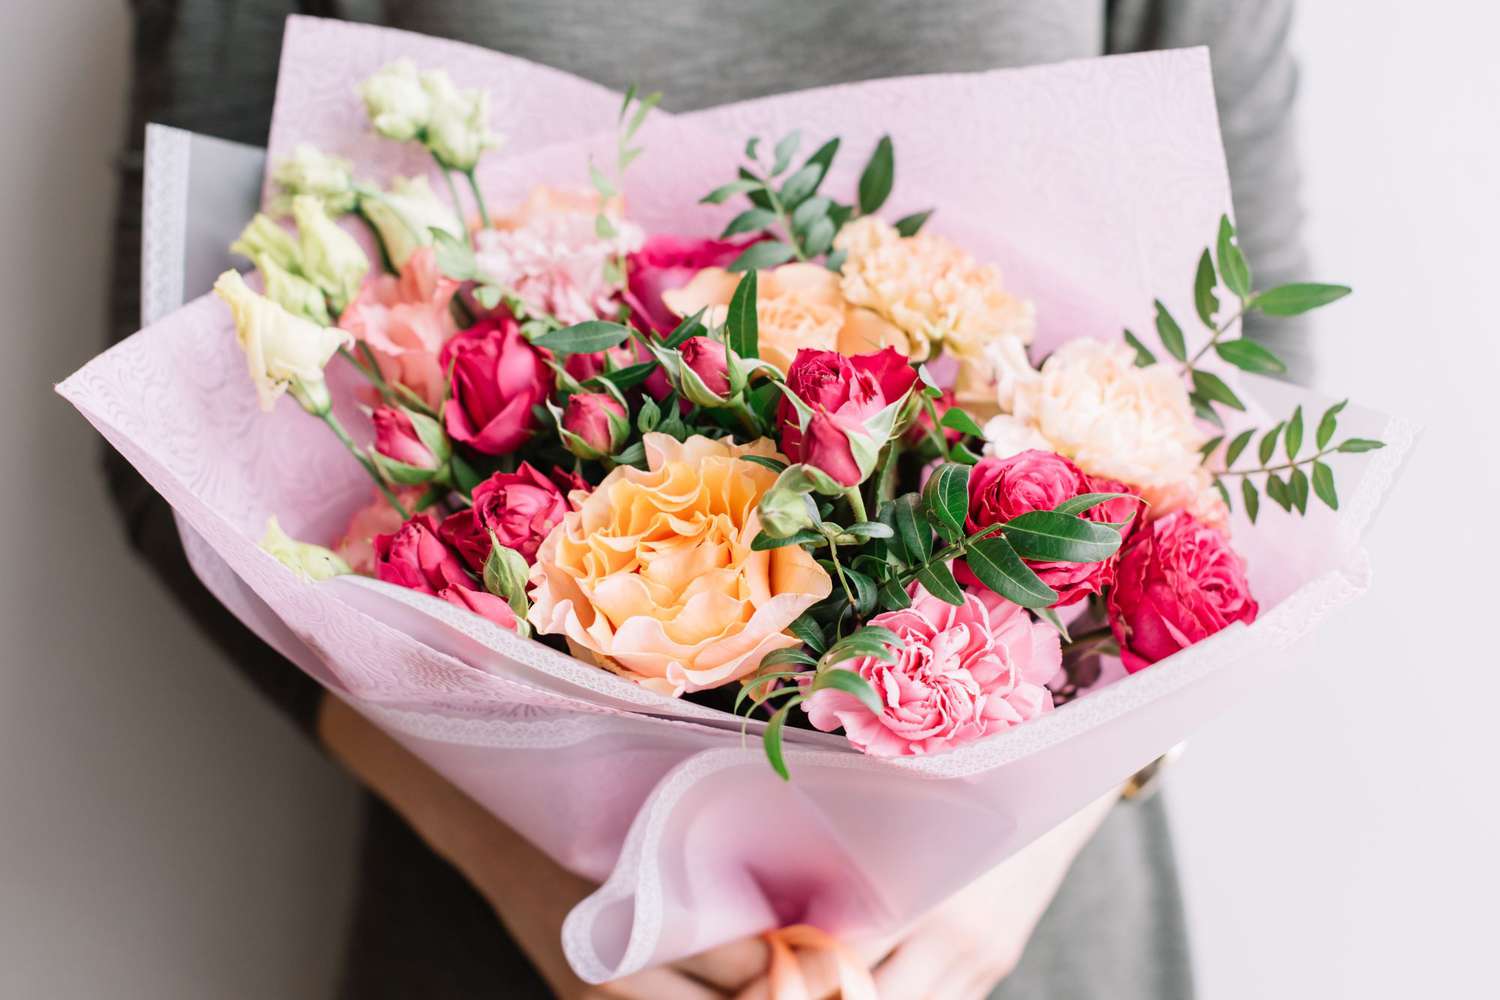 woman holding a colourful fresh blossoming flower bouquet of different sorts of roses, carnations, eustoma, peonies